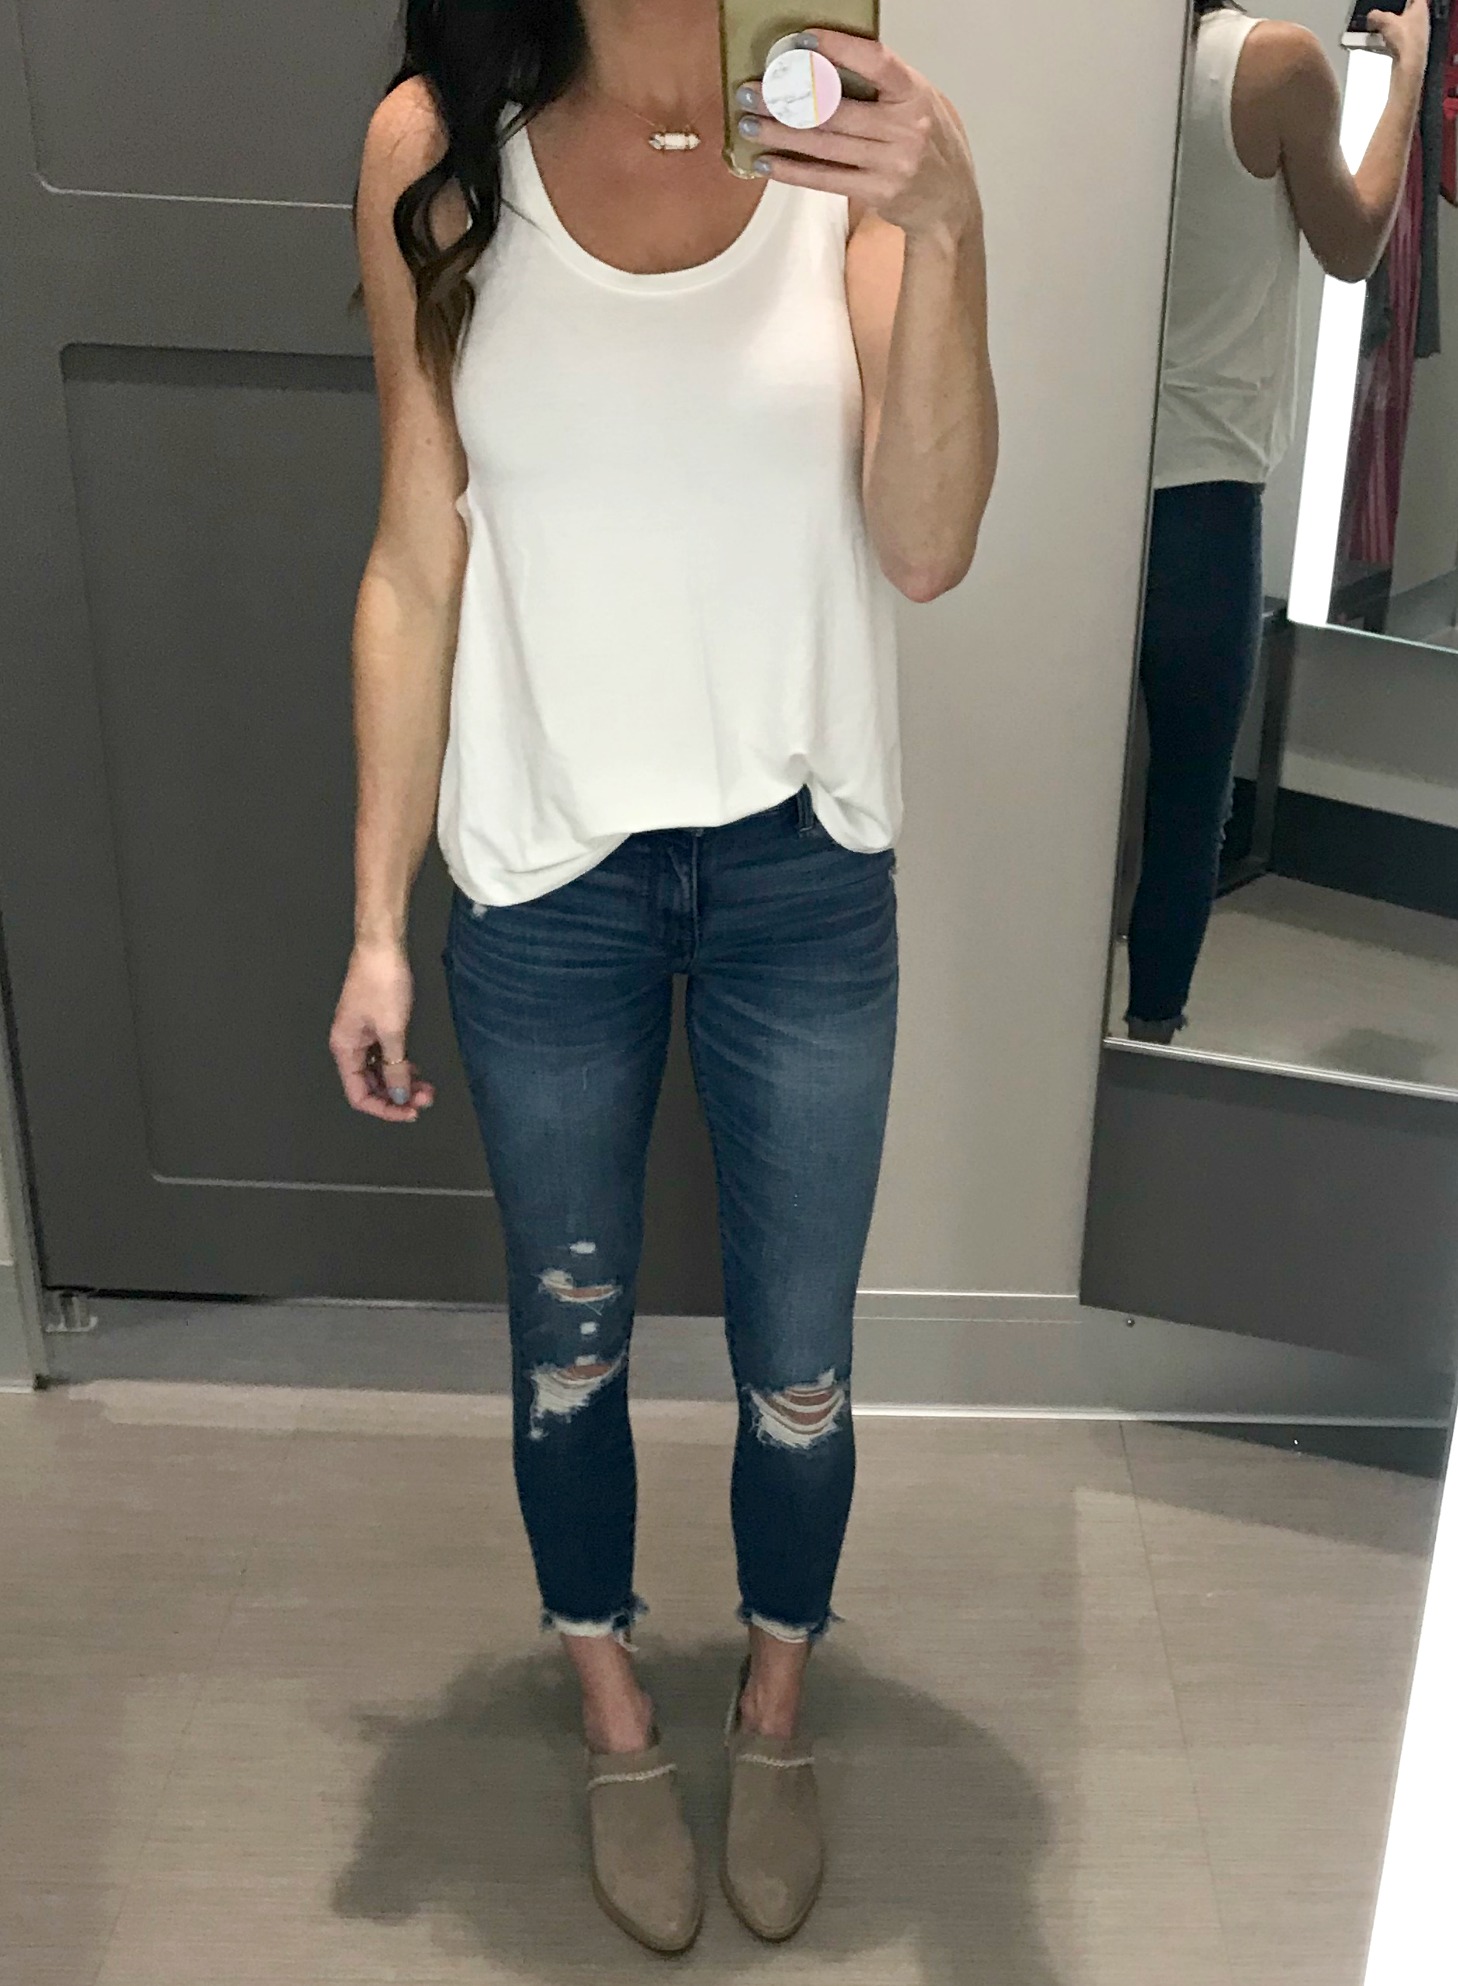 White Tank, jeans, booties